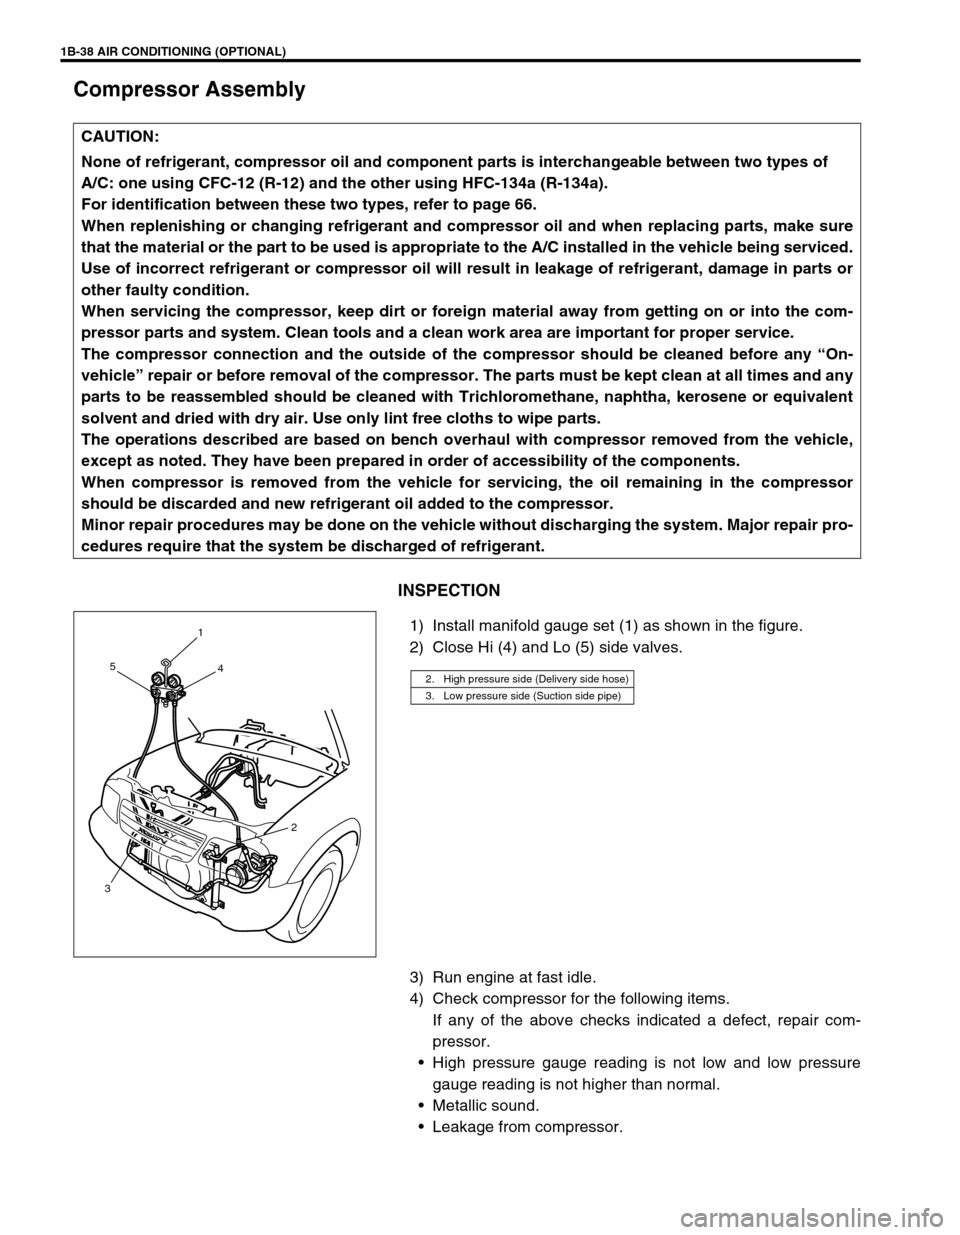 SUZUKI GRAND VITARA 1999 2.G Owners Manual 1B-38 AIR CONDITIONING (OPTIONAL)
Compressor Assembly
INSPECTION
1) Install manifold gauge set (1) as shown in the figure.
2) Close Hi (4) and Lo (5) side valves.
3) Run engine at fast idle.
4) Check 